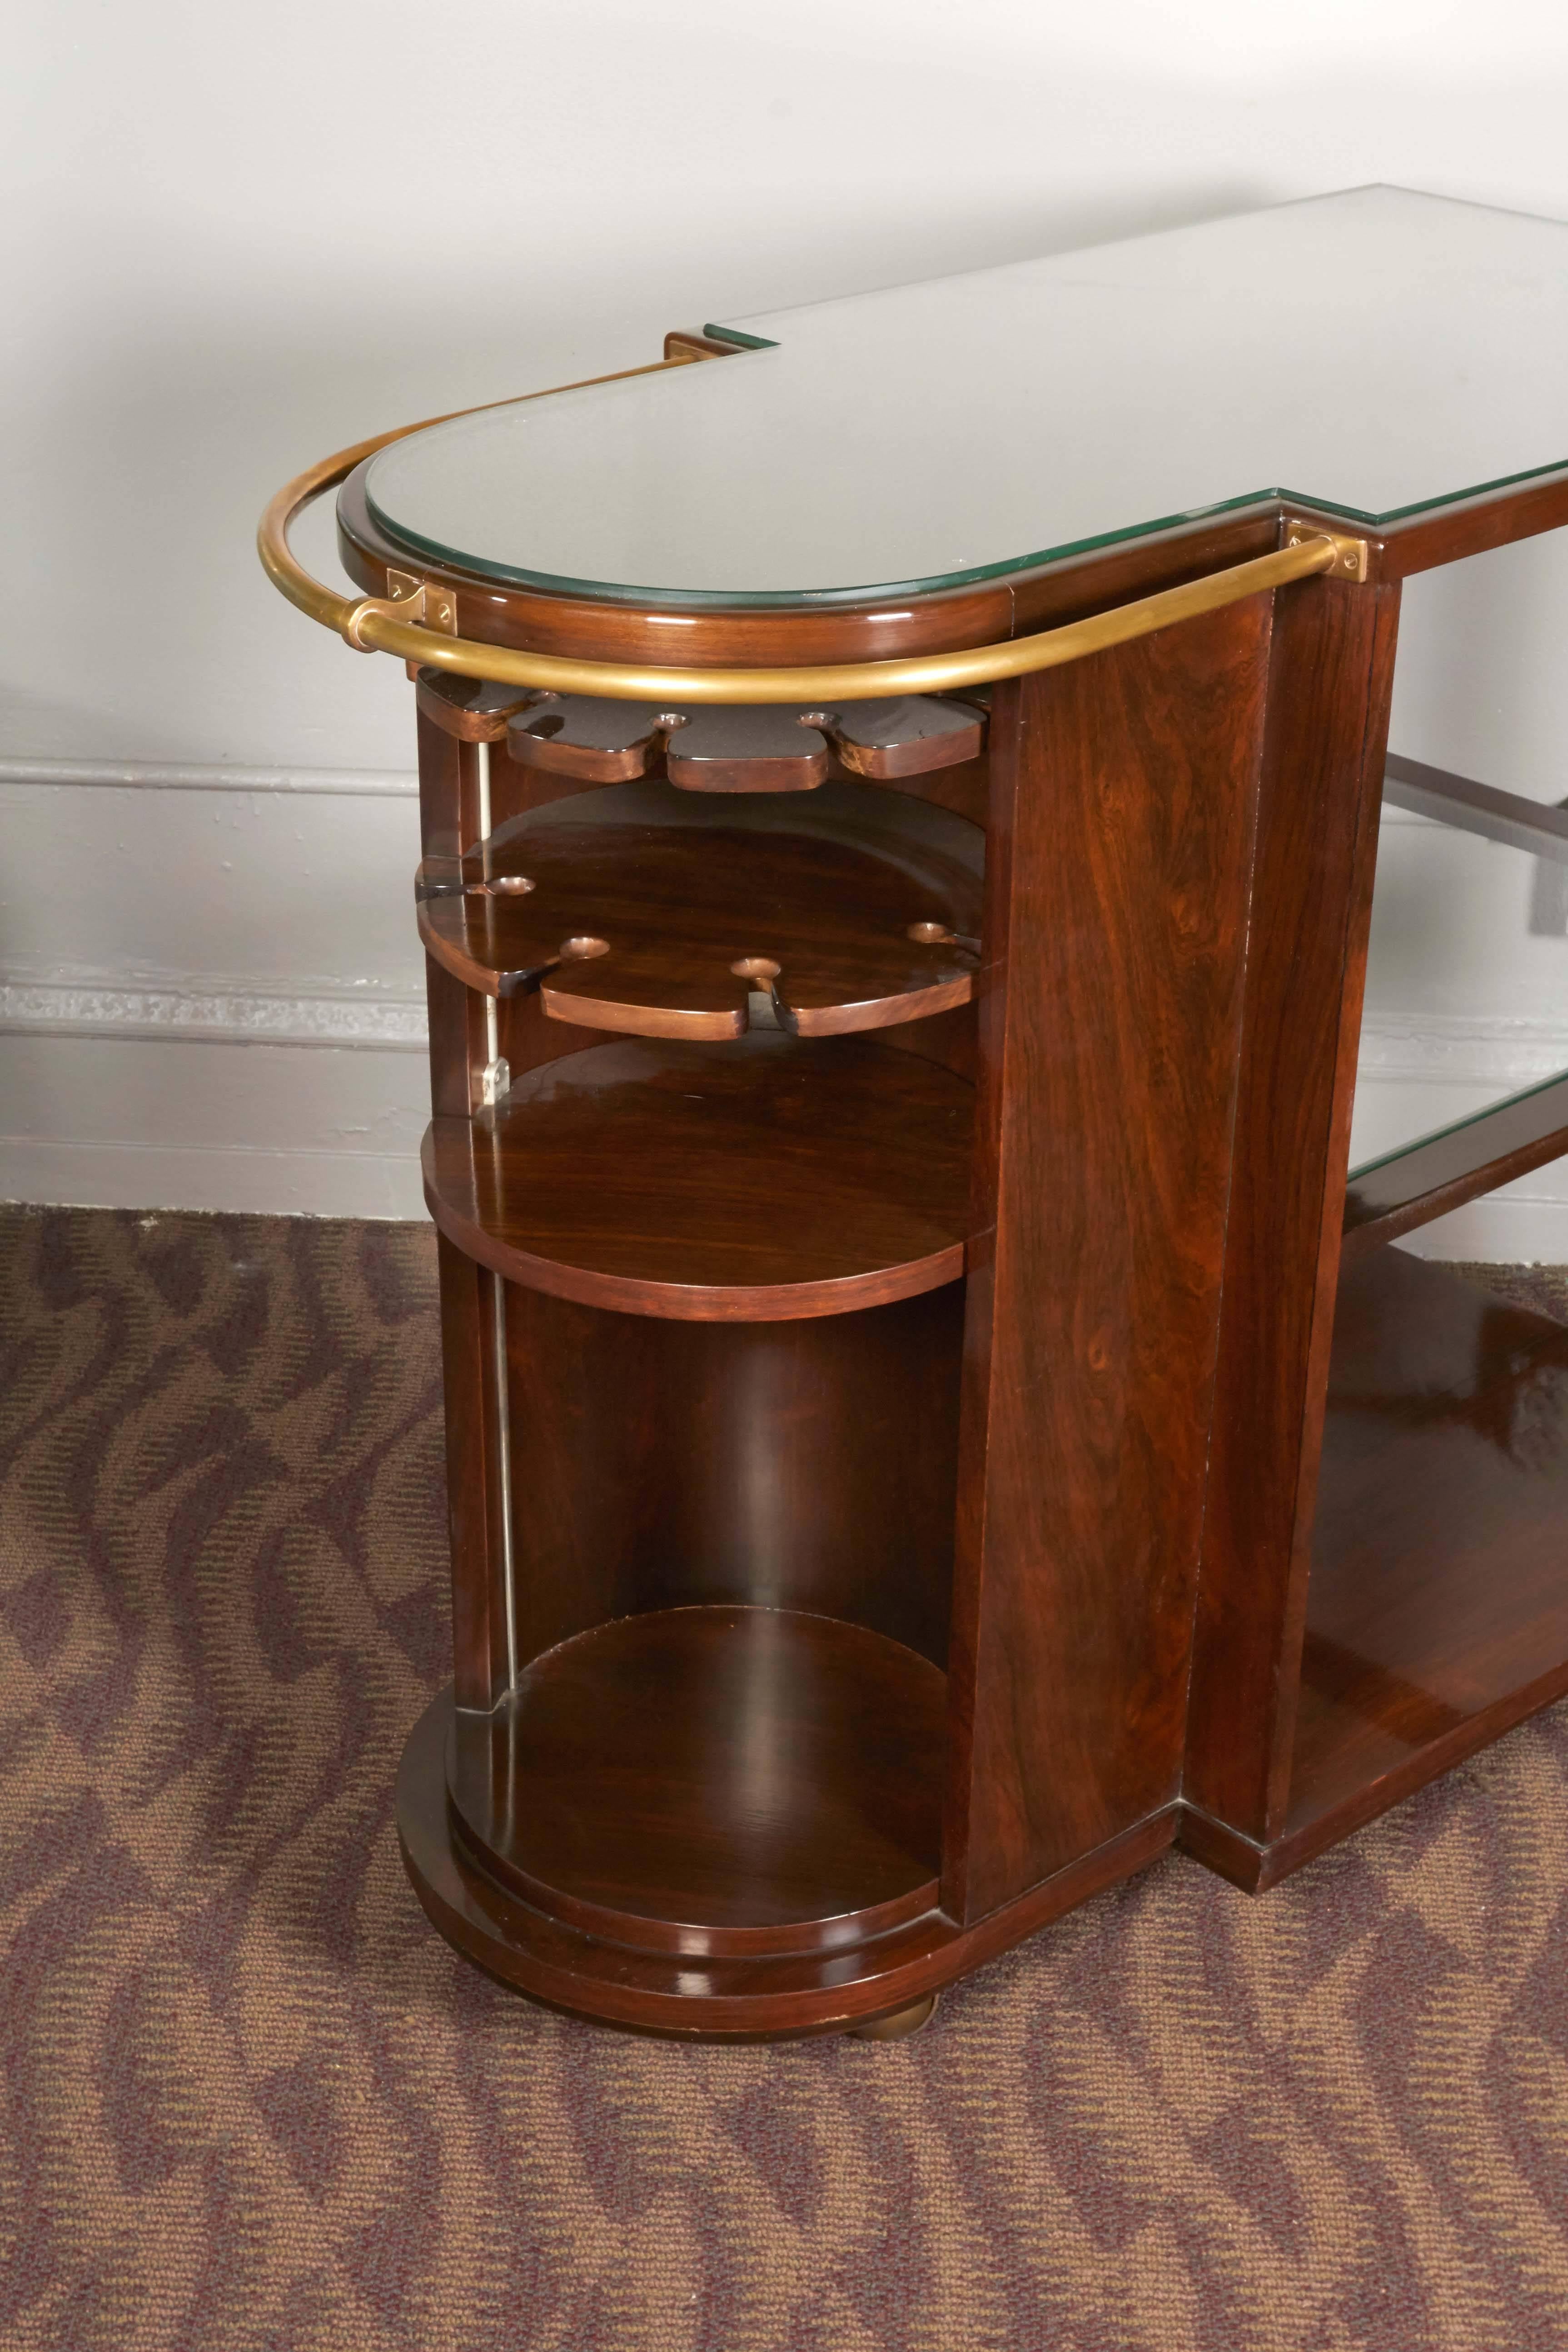 An Art Deco cocktail bar cart, produced circa 1940s, in mahogany with high gloss finish, accented with brass handle on caster wheels, including lower shelf and featuring a concealed cabinet with racks and storage space. Very good vintage condition